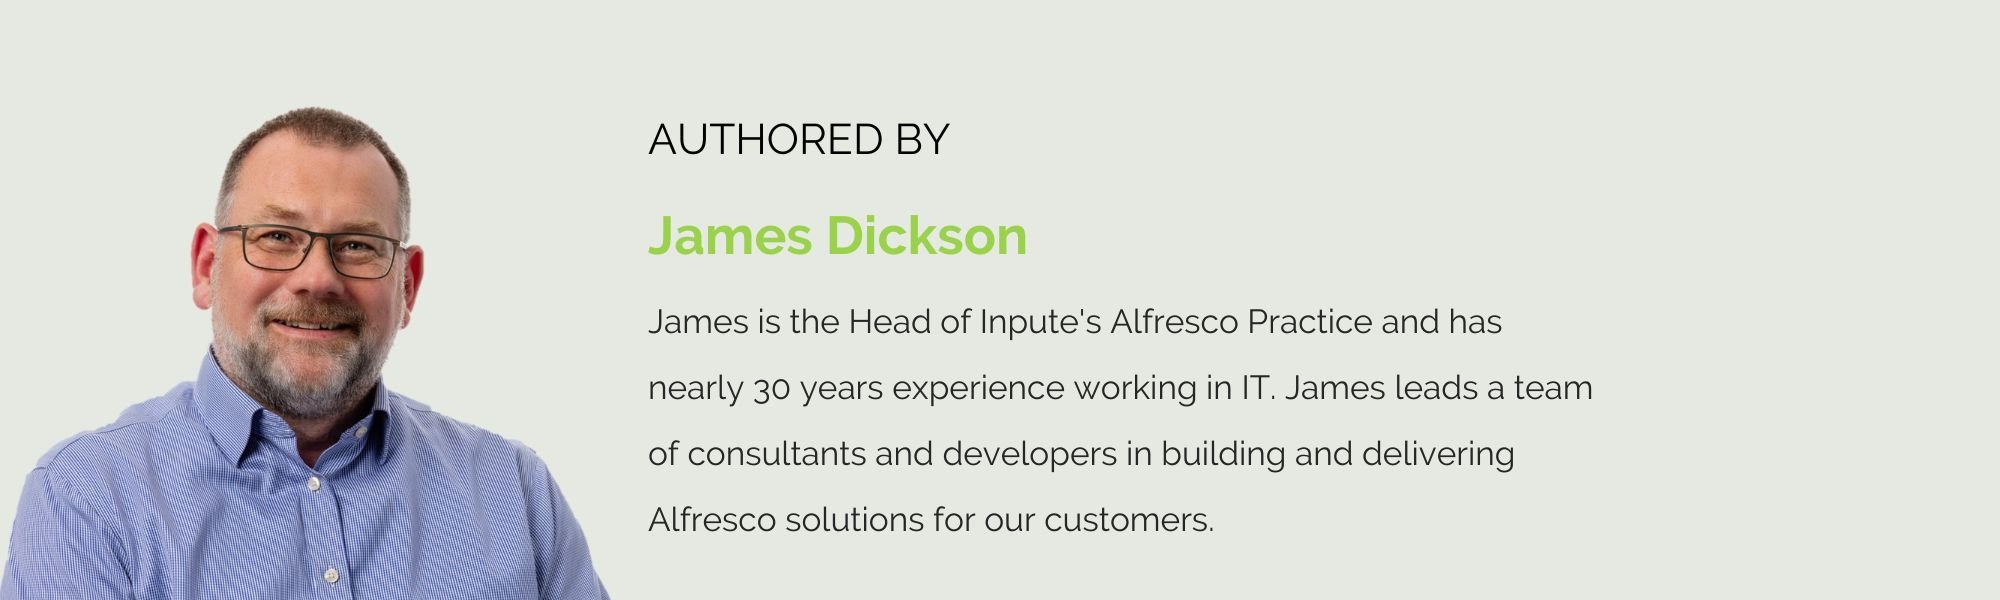 James Dickson James is the Head of Inpute's Alfresco Practice and has nearly 30 years experience working in IT. James leads a team of consultants and developers in building and delivering Alfresco solutions for our customers.